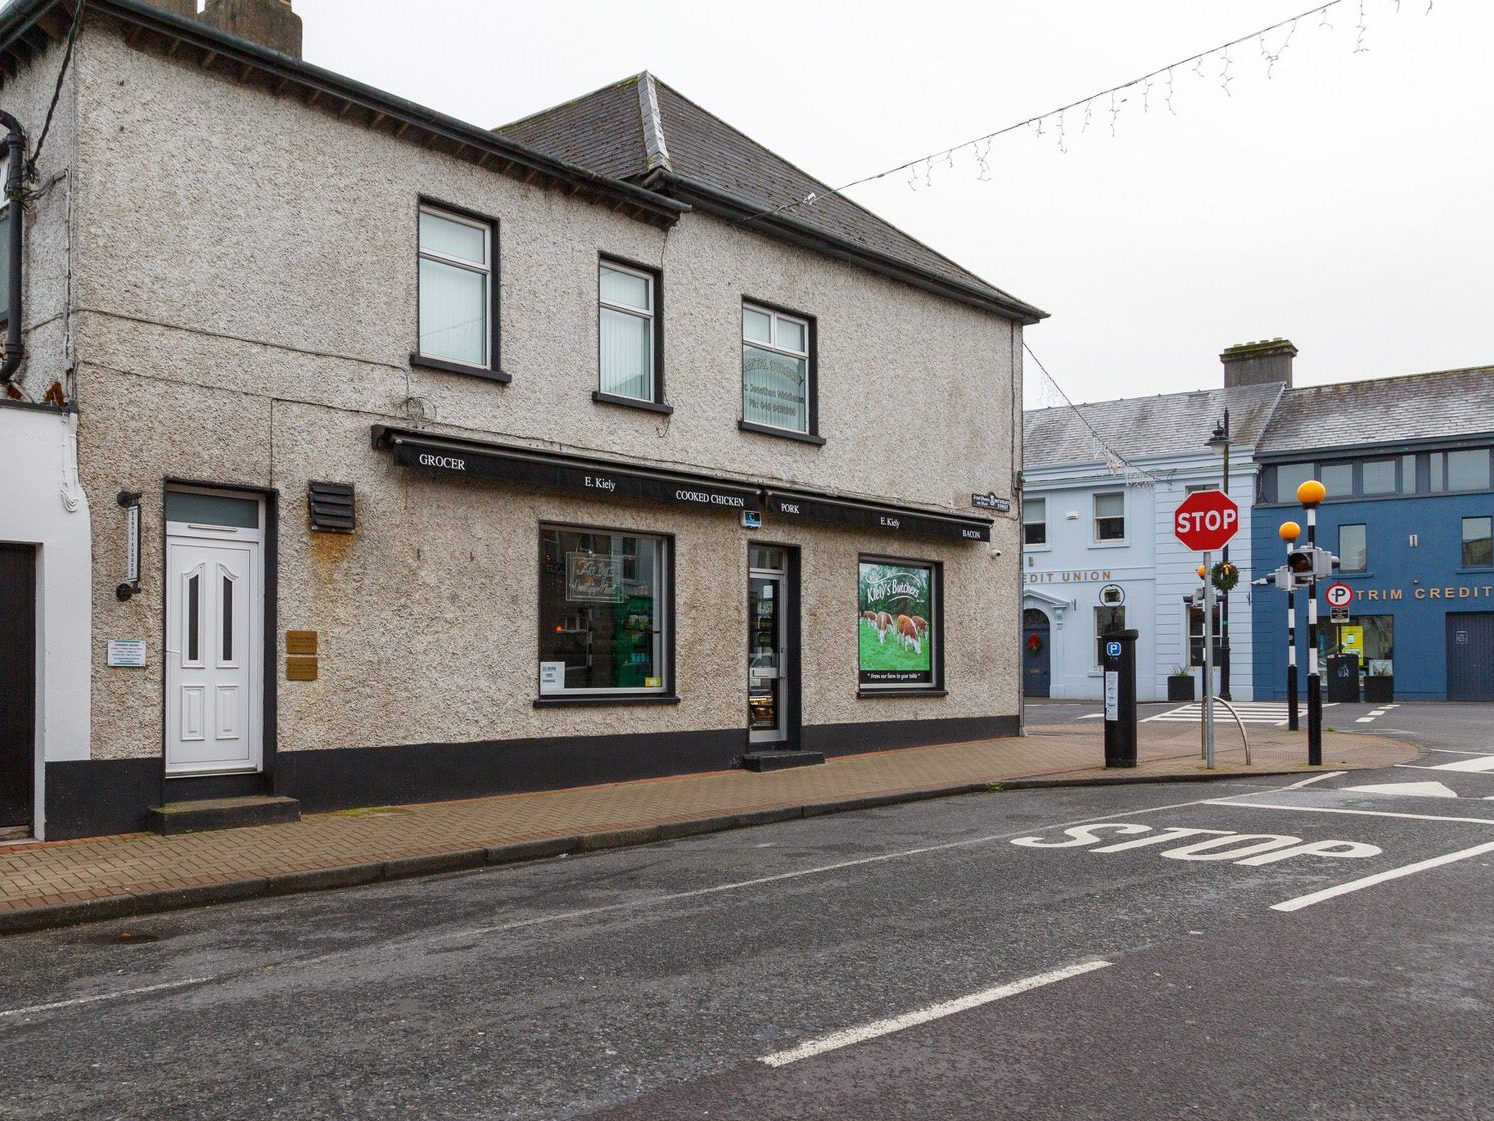 WATERGATE STREET AND WATERGATE BRIDGE [THE TOWN OF TRIM IN COUNTY MEATH]-226469-1